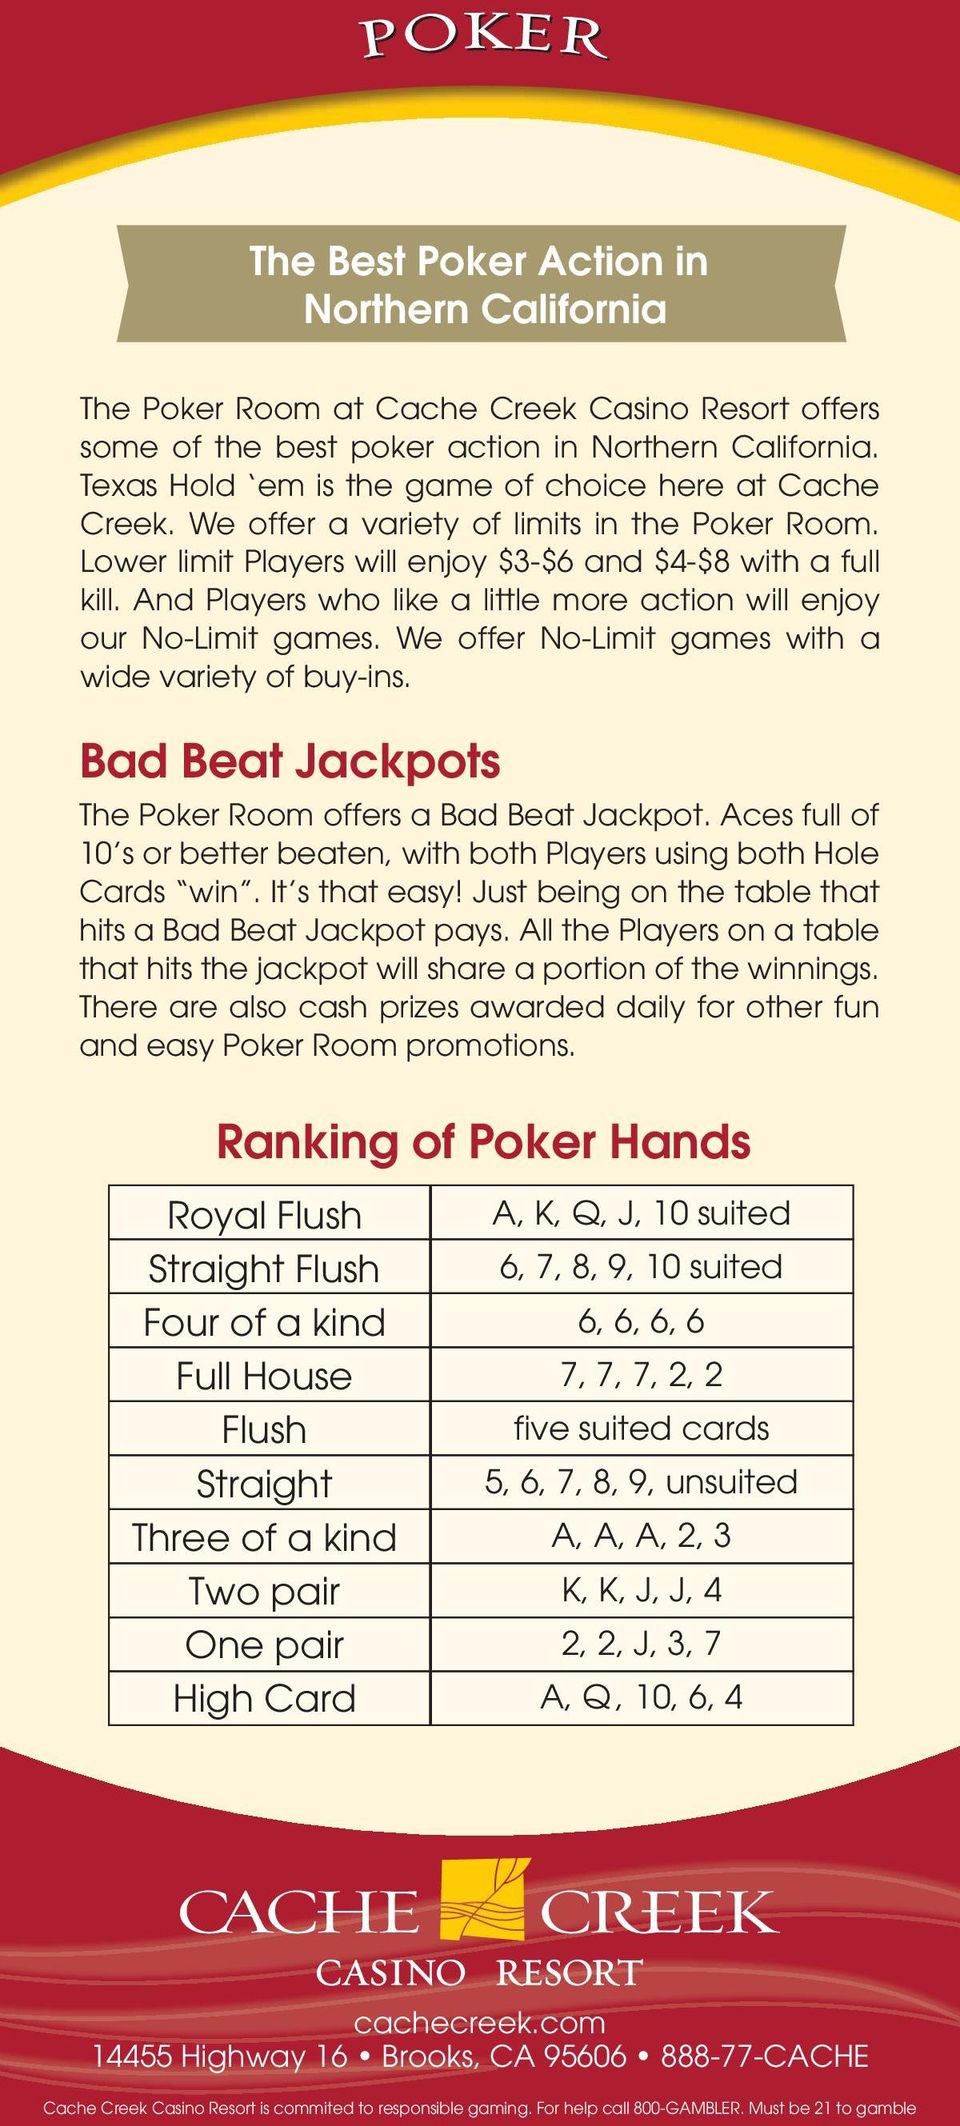 And Players who like a little more action will enjoy our No-Limit games. We offer No-Limit games with a wide variety of buy-ins. Bad Beat Jackpots The Poker Room offers a Bad Beat Jackpot.